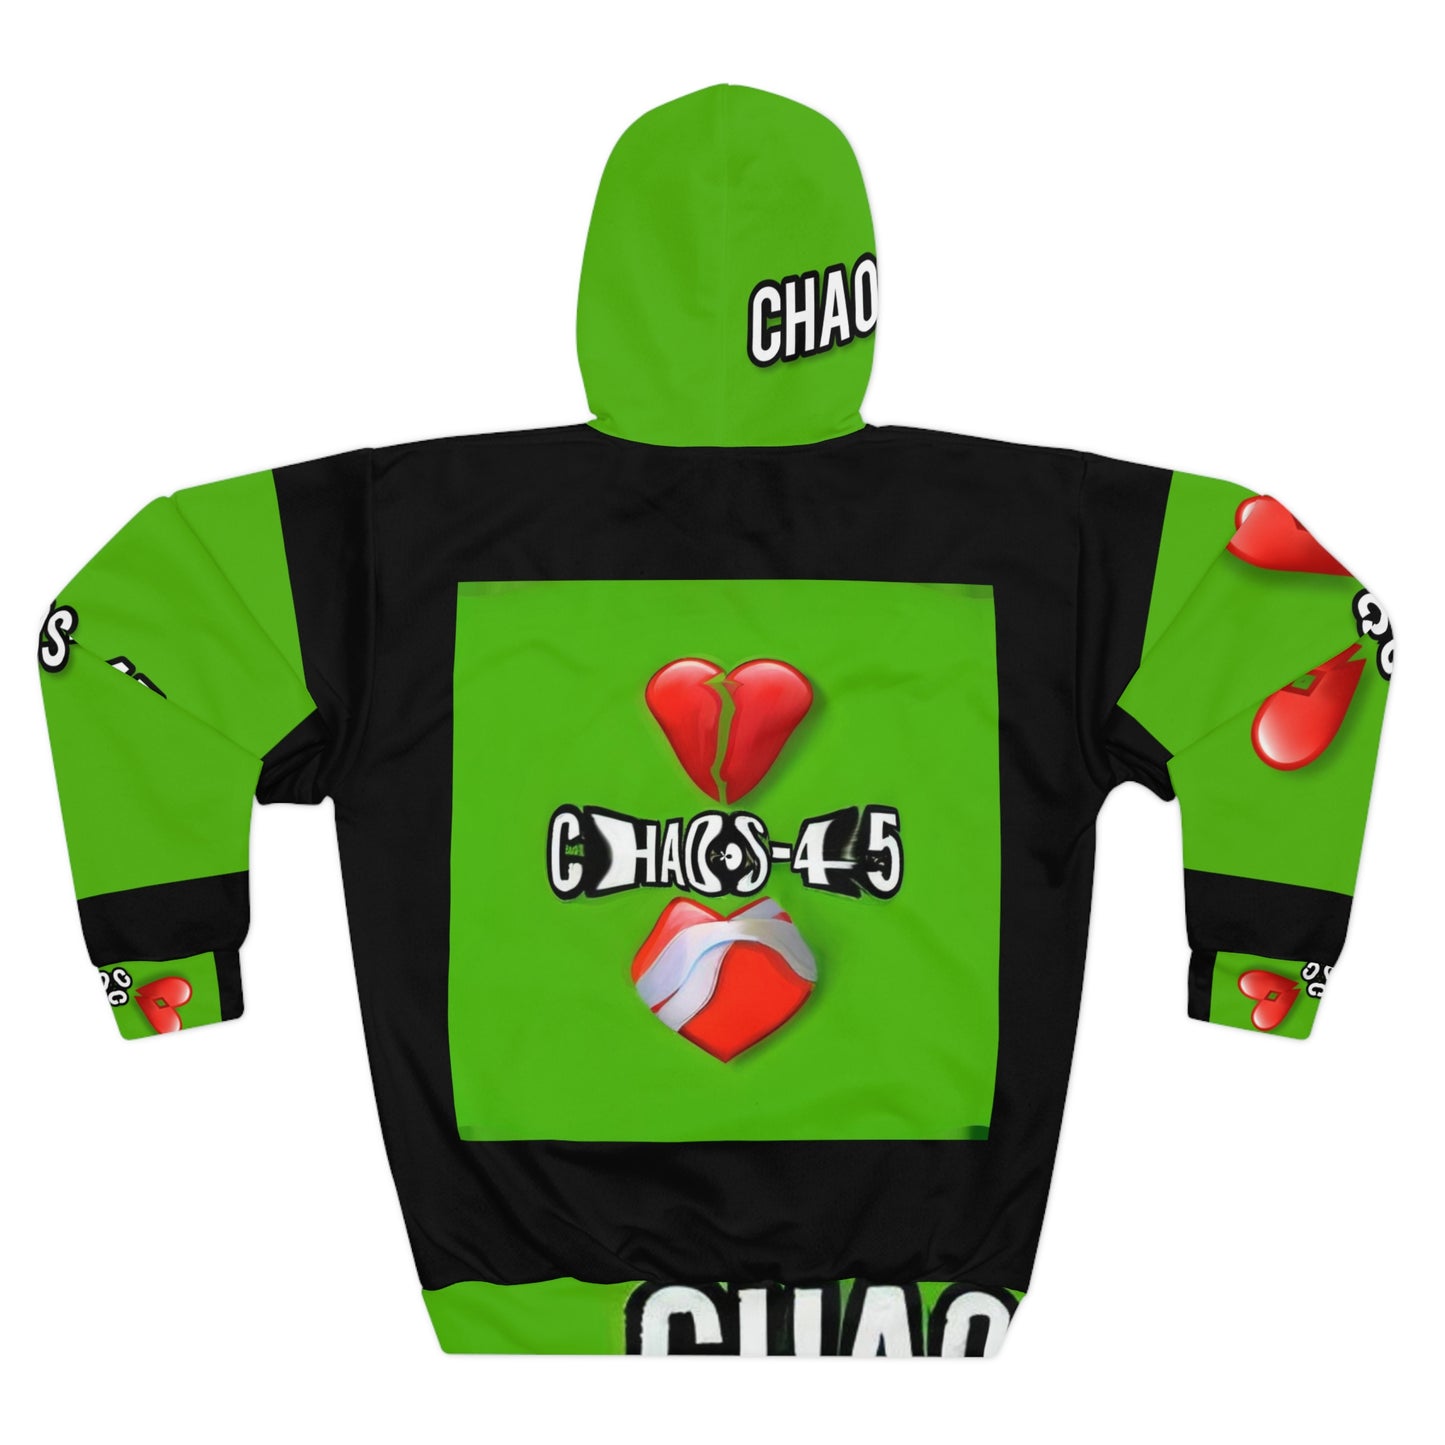 1A-Chaos Love ❤️ Unisex Pullover Hoodie (AOP)